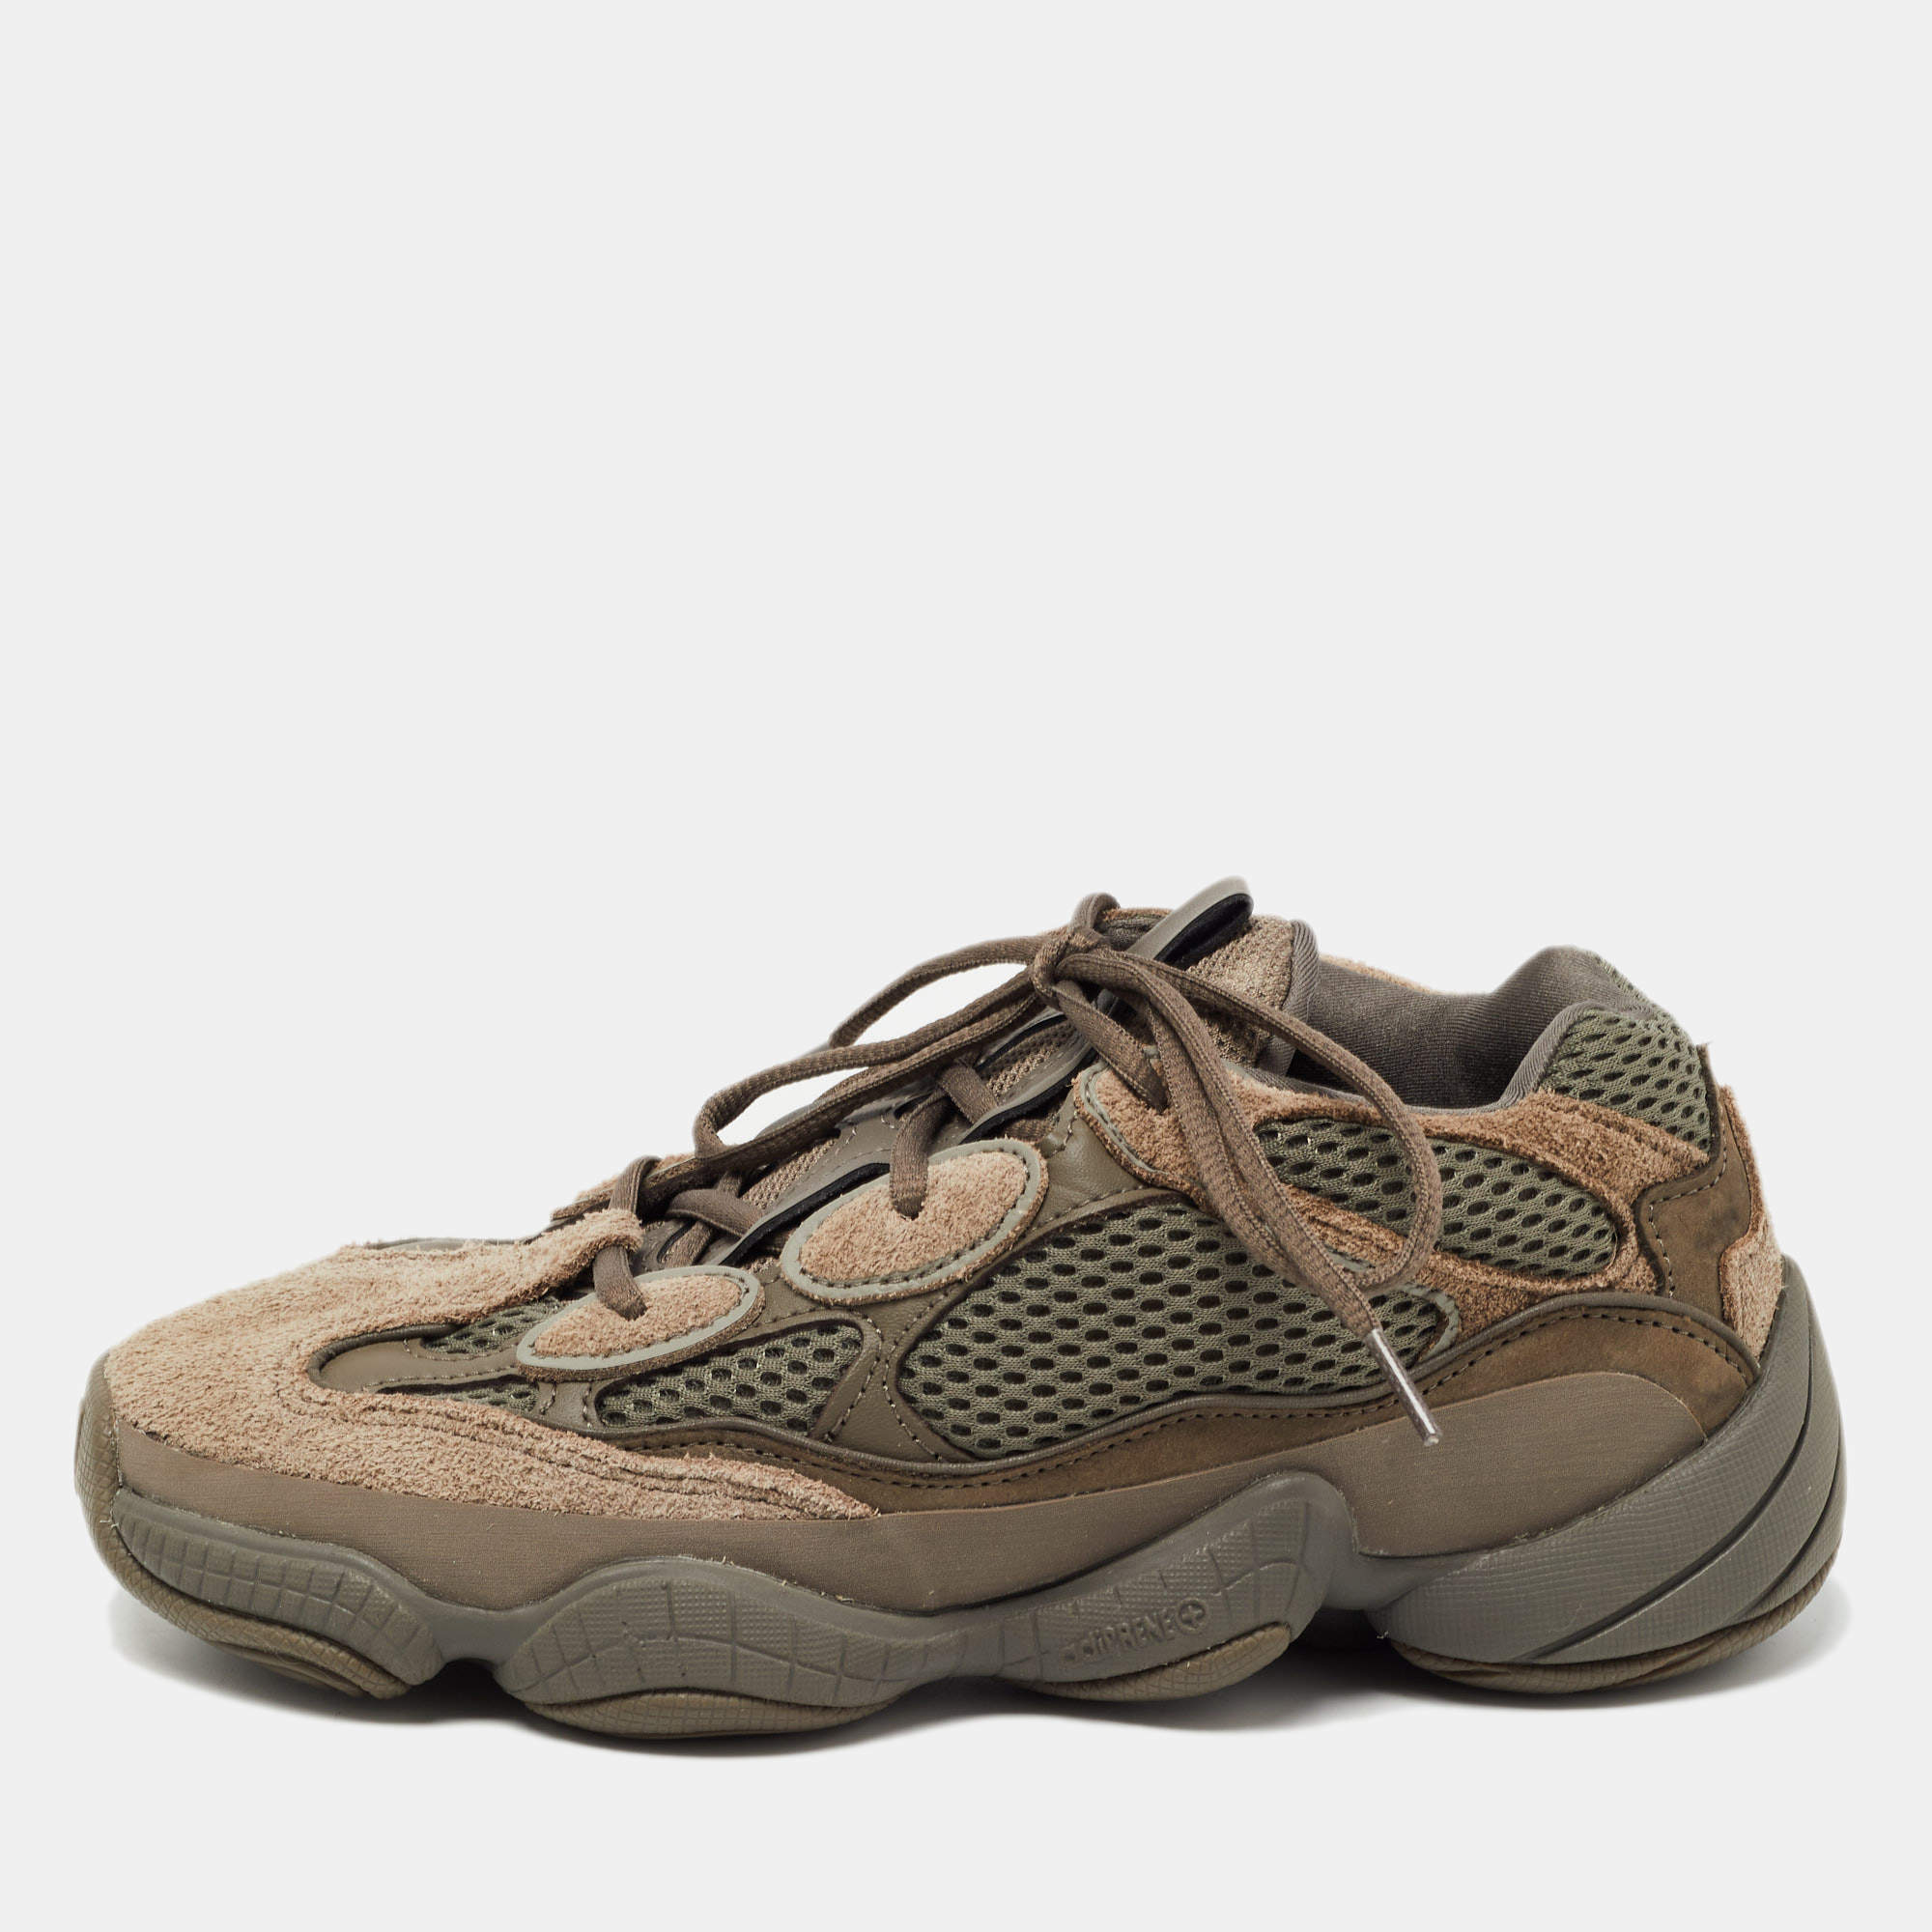 Yeezy x Adidas Brown/Grey Leather and Suede Yeezy 500 Clay Sneakers Size 39  1/3 Yeezy x Adidas | TLC